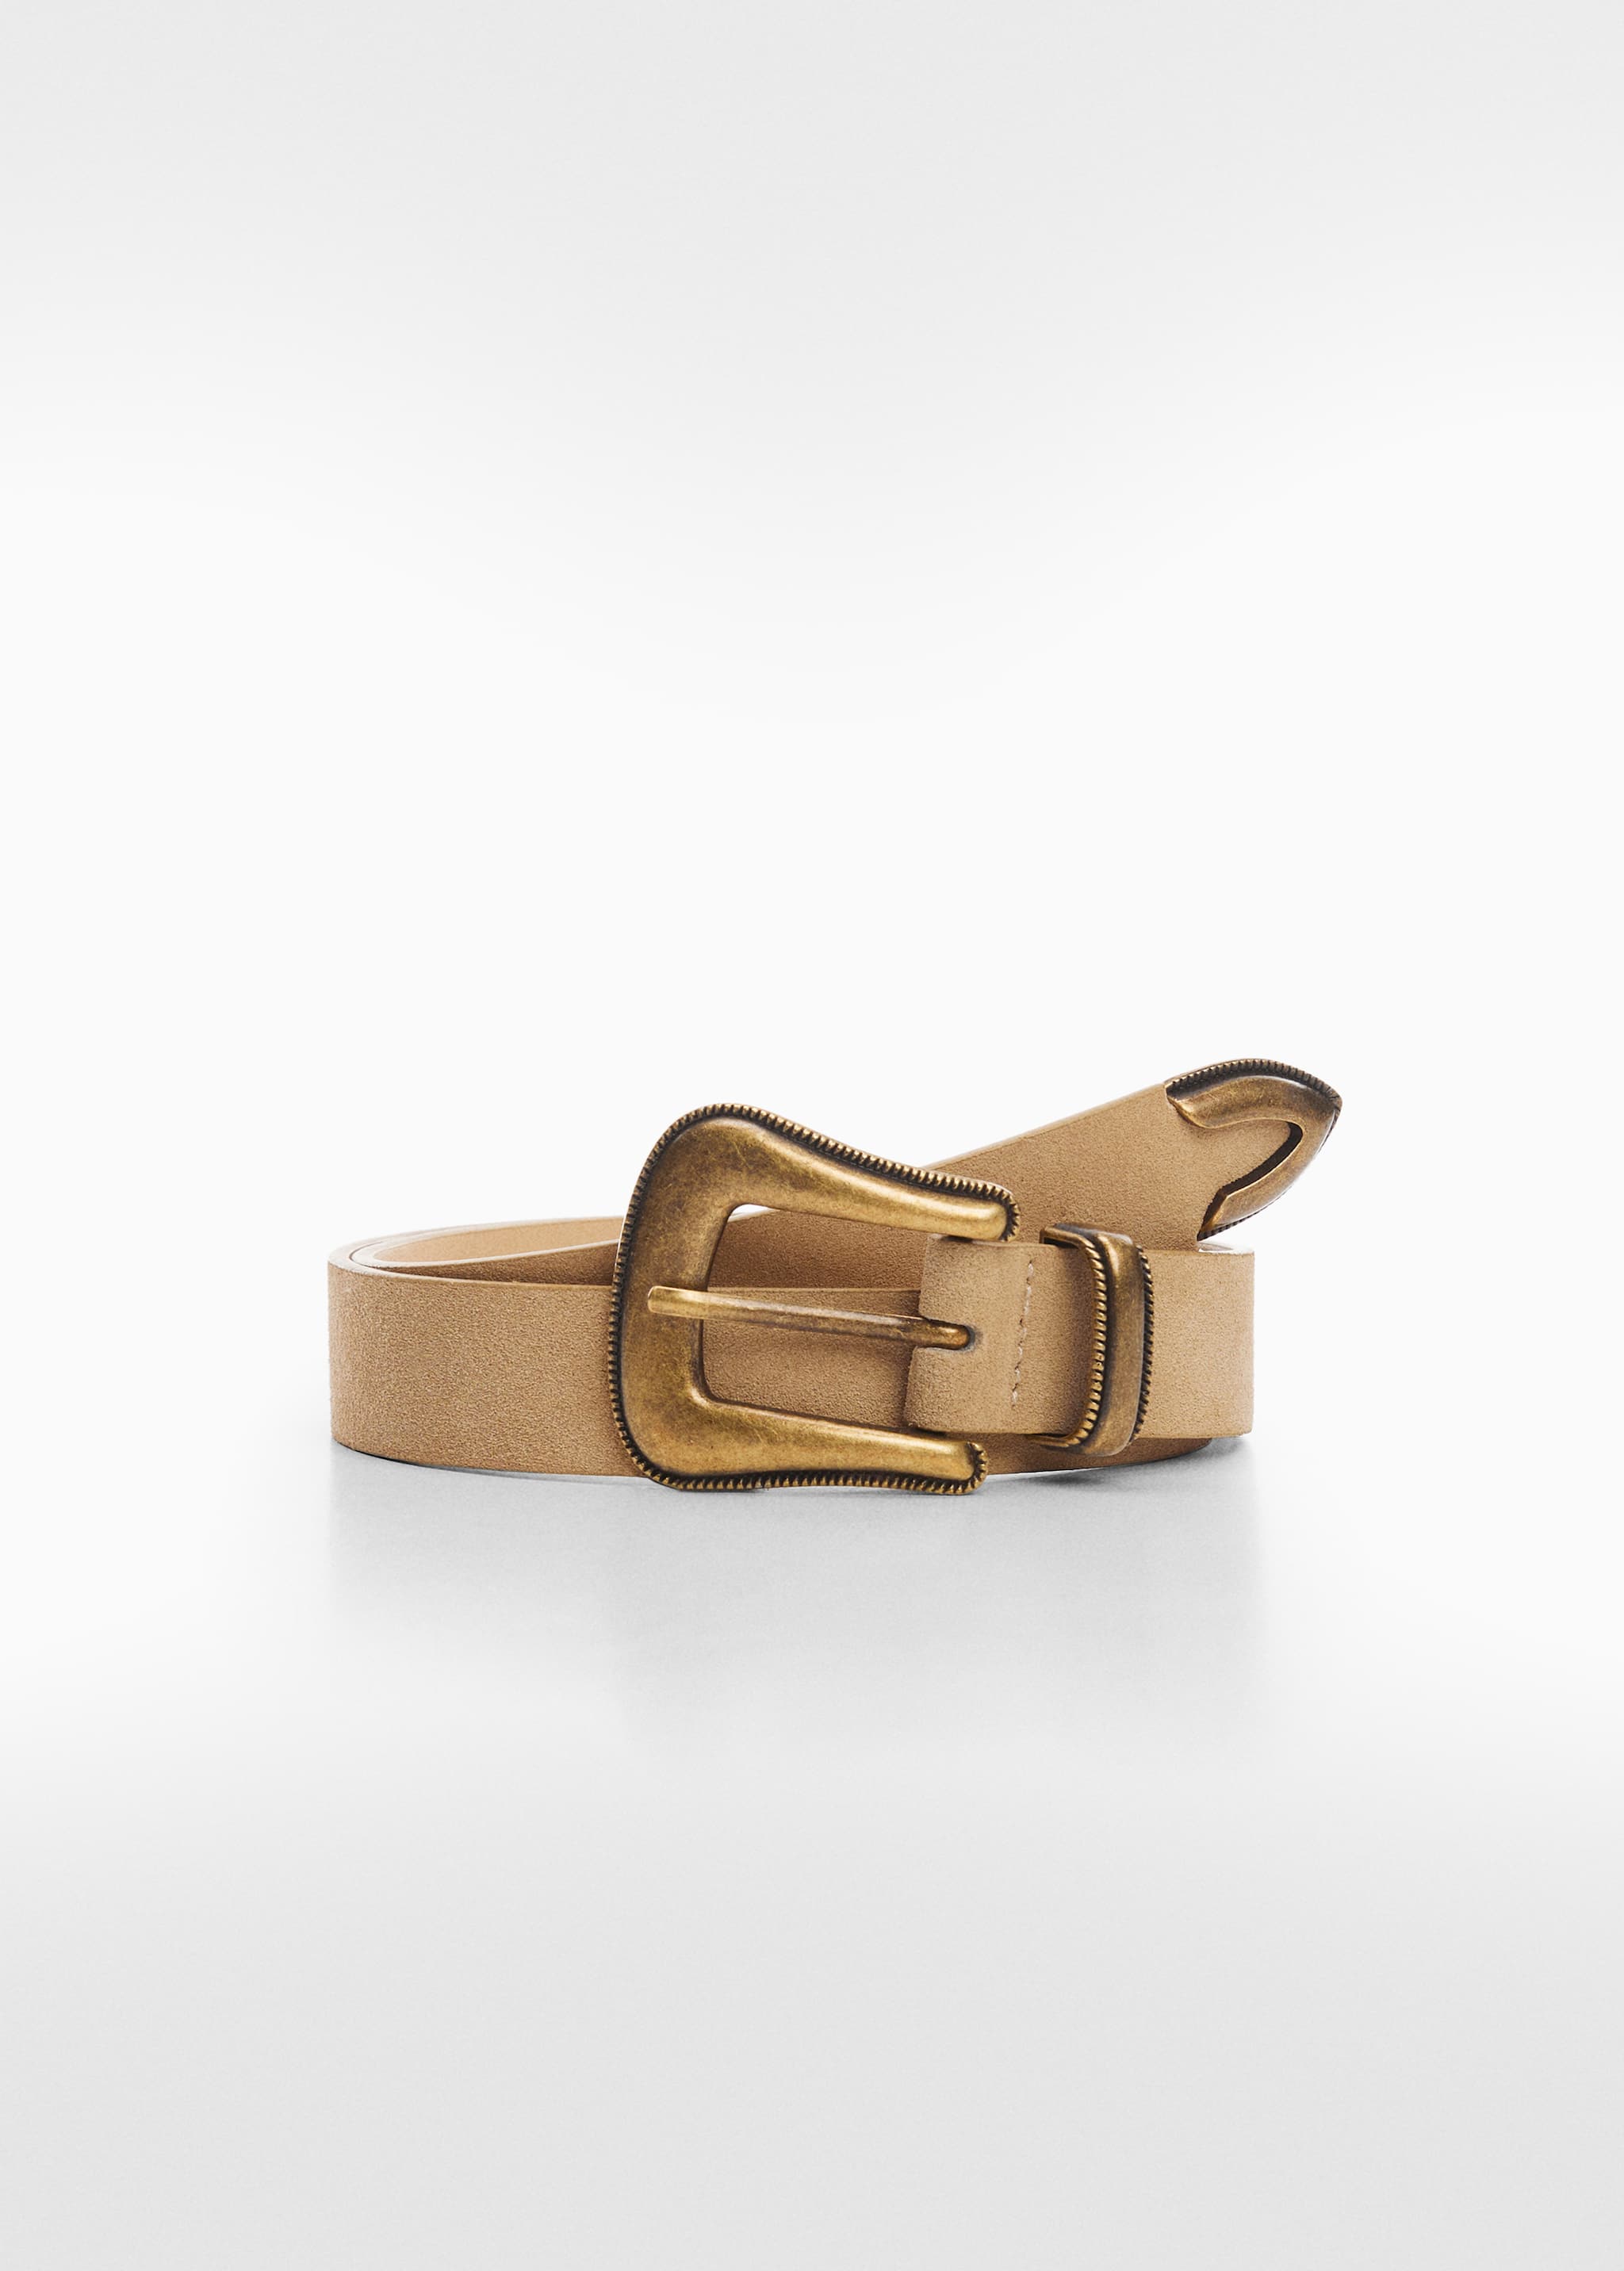 Buckle leather belt - Article without model